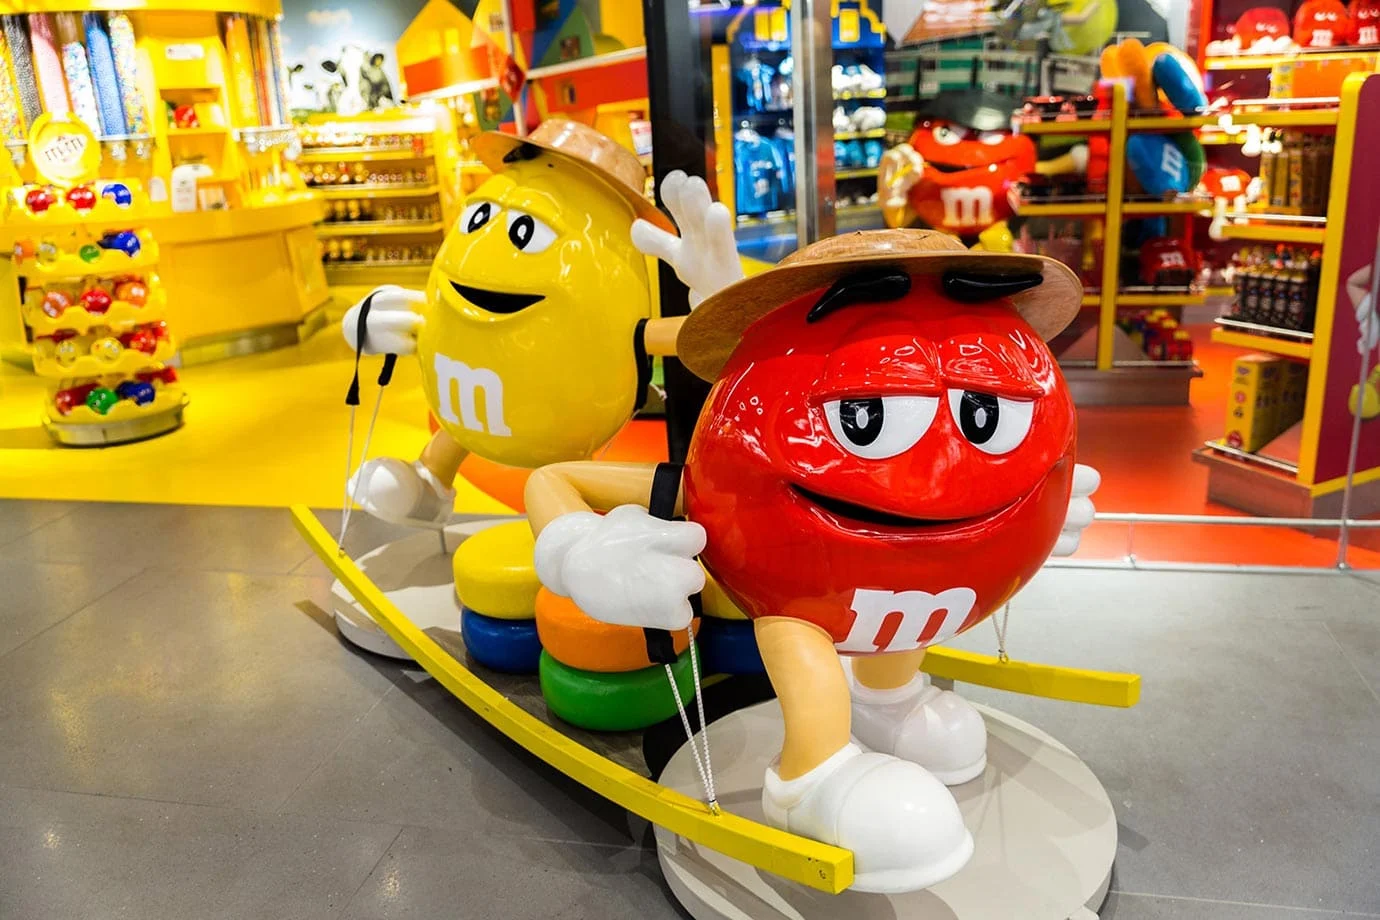 M&M store, Schiphol Airport